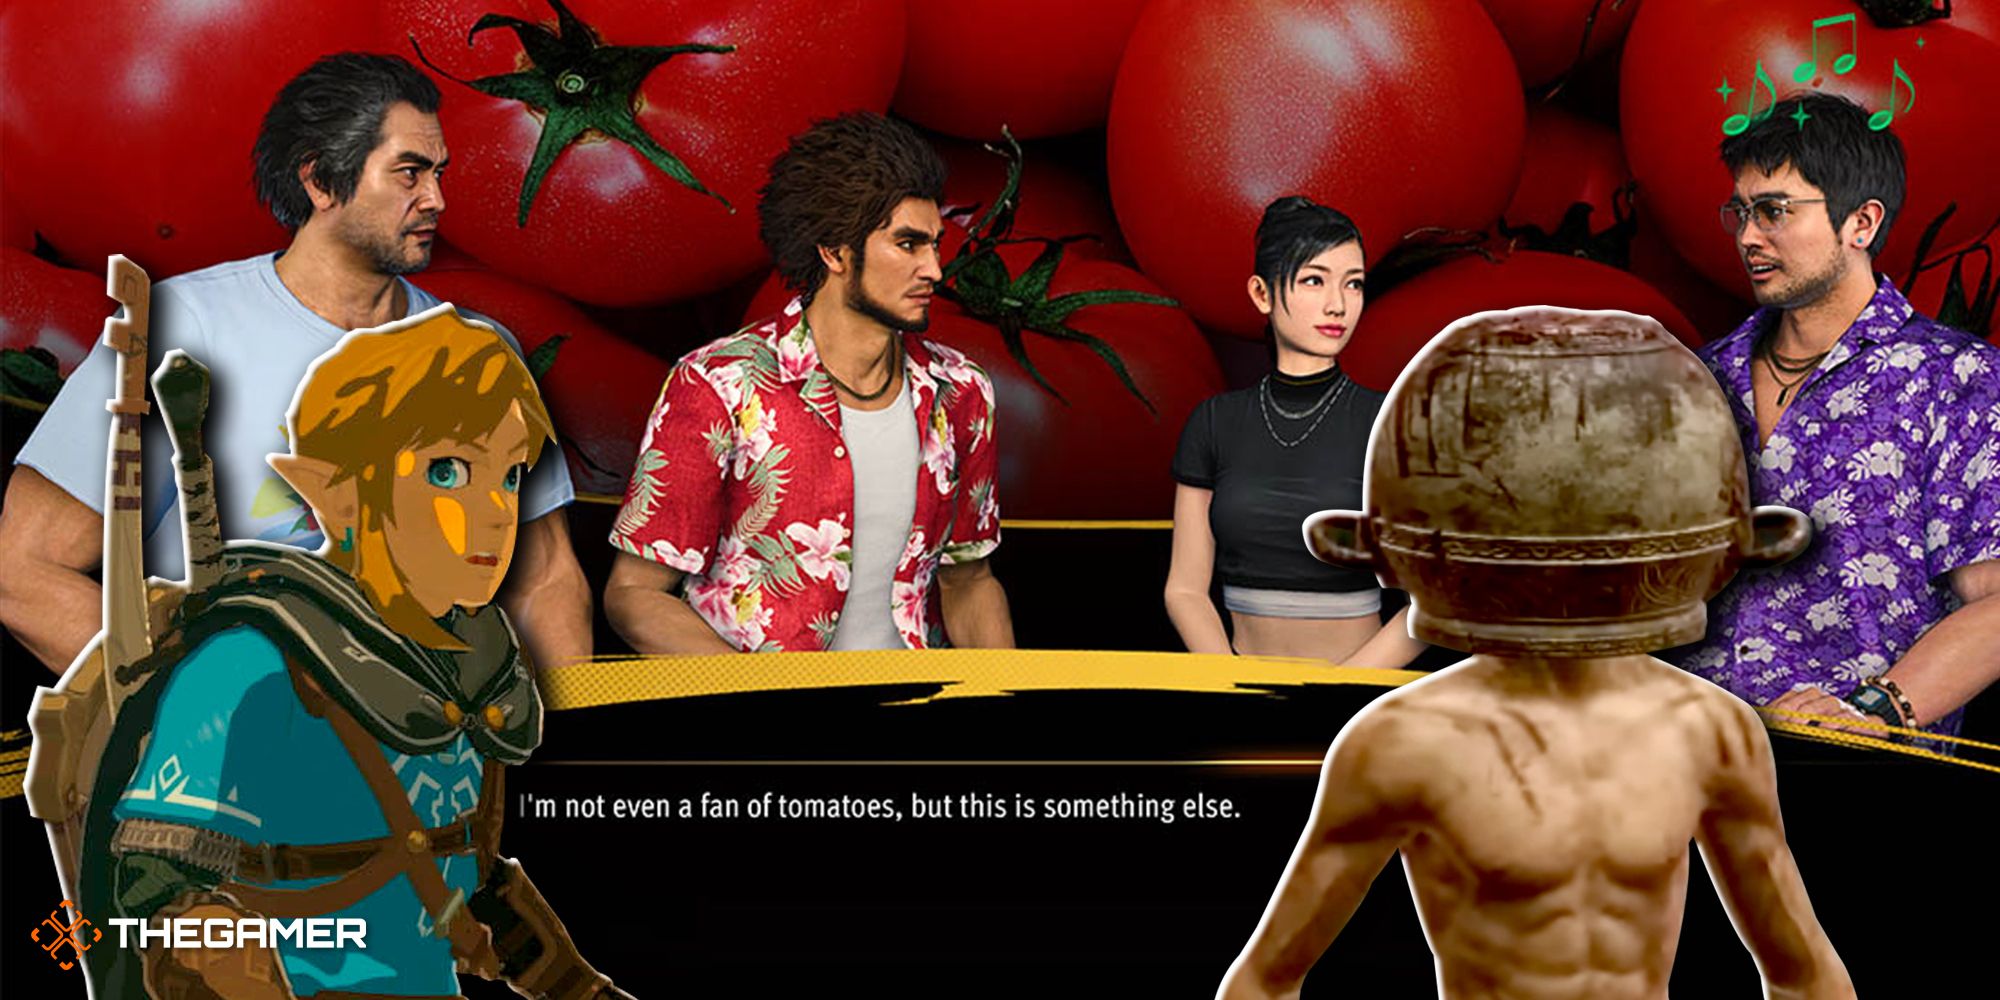 Like a Dragon Infinite Wealth cast discussing their dislike of tomatoes in front of Let Me Solo Her and Link